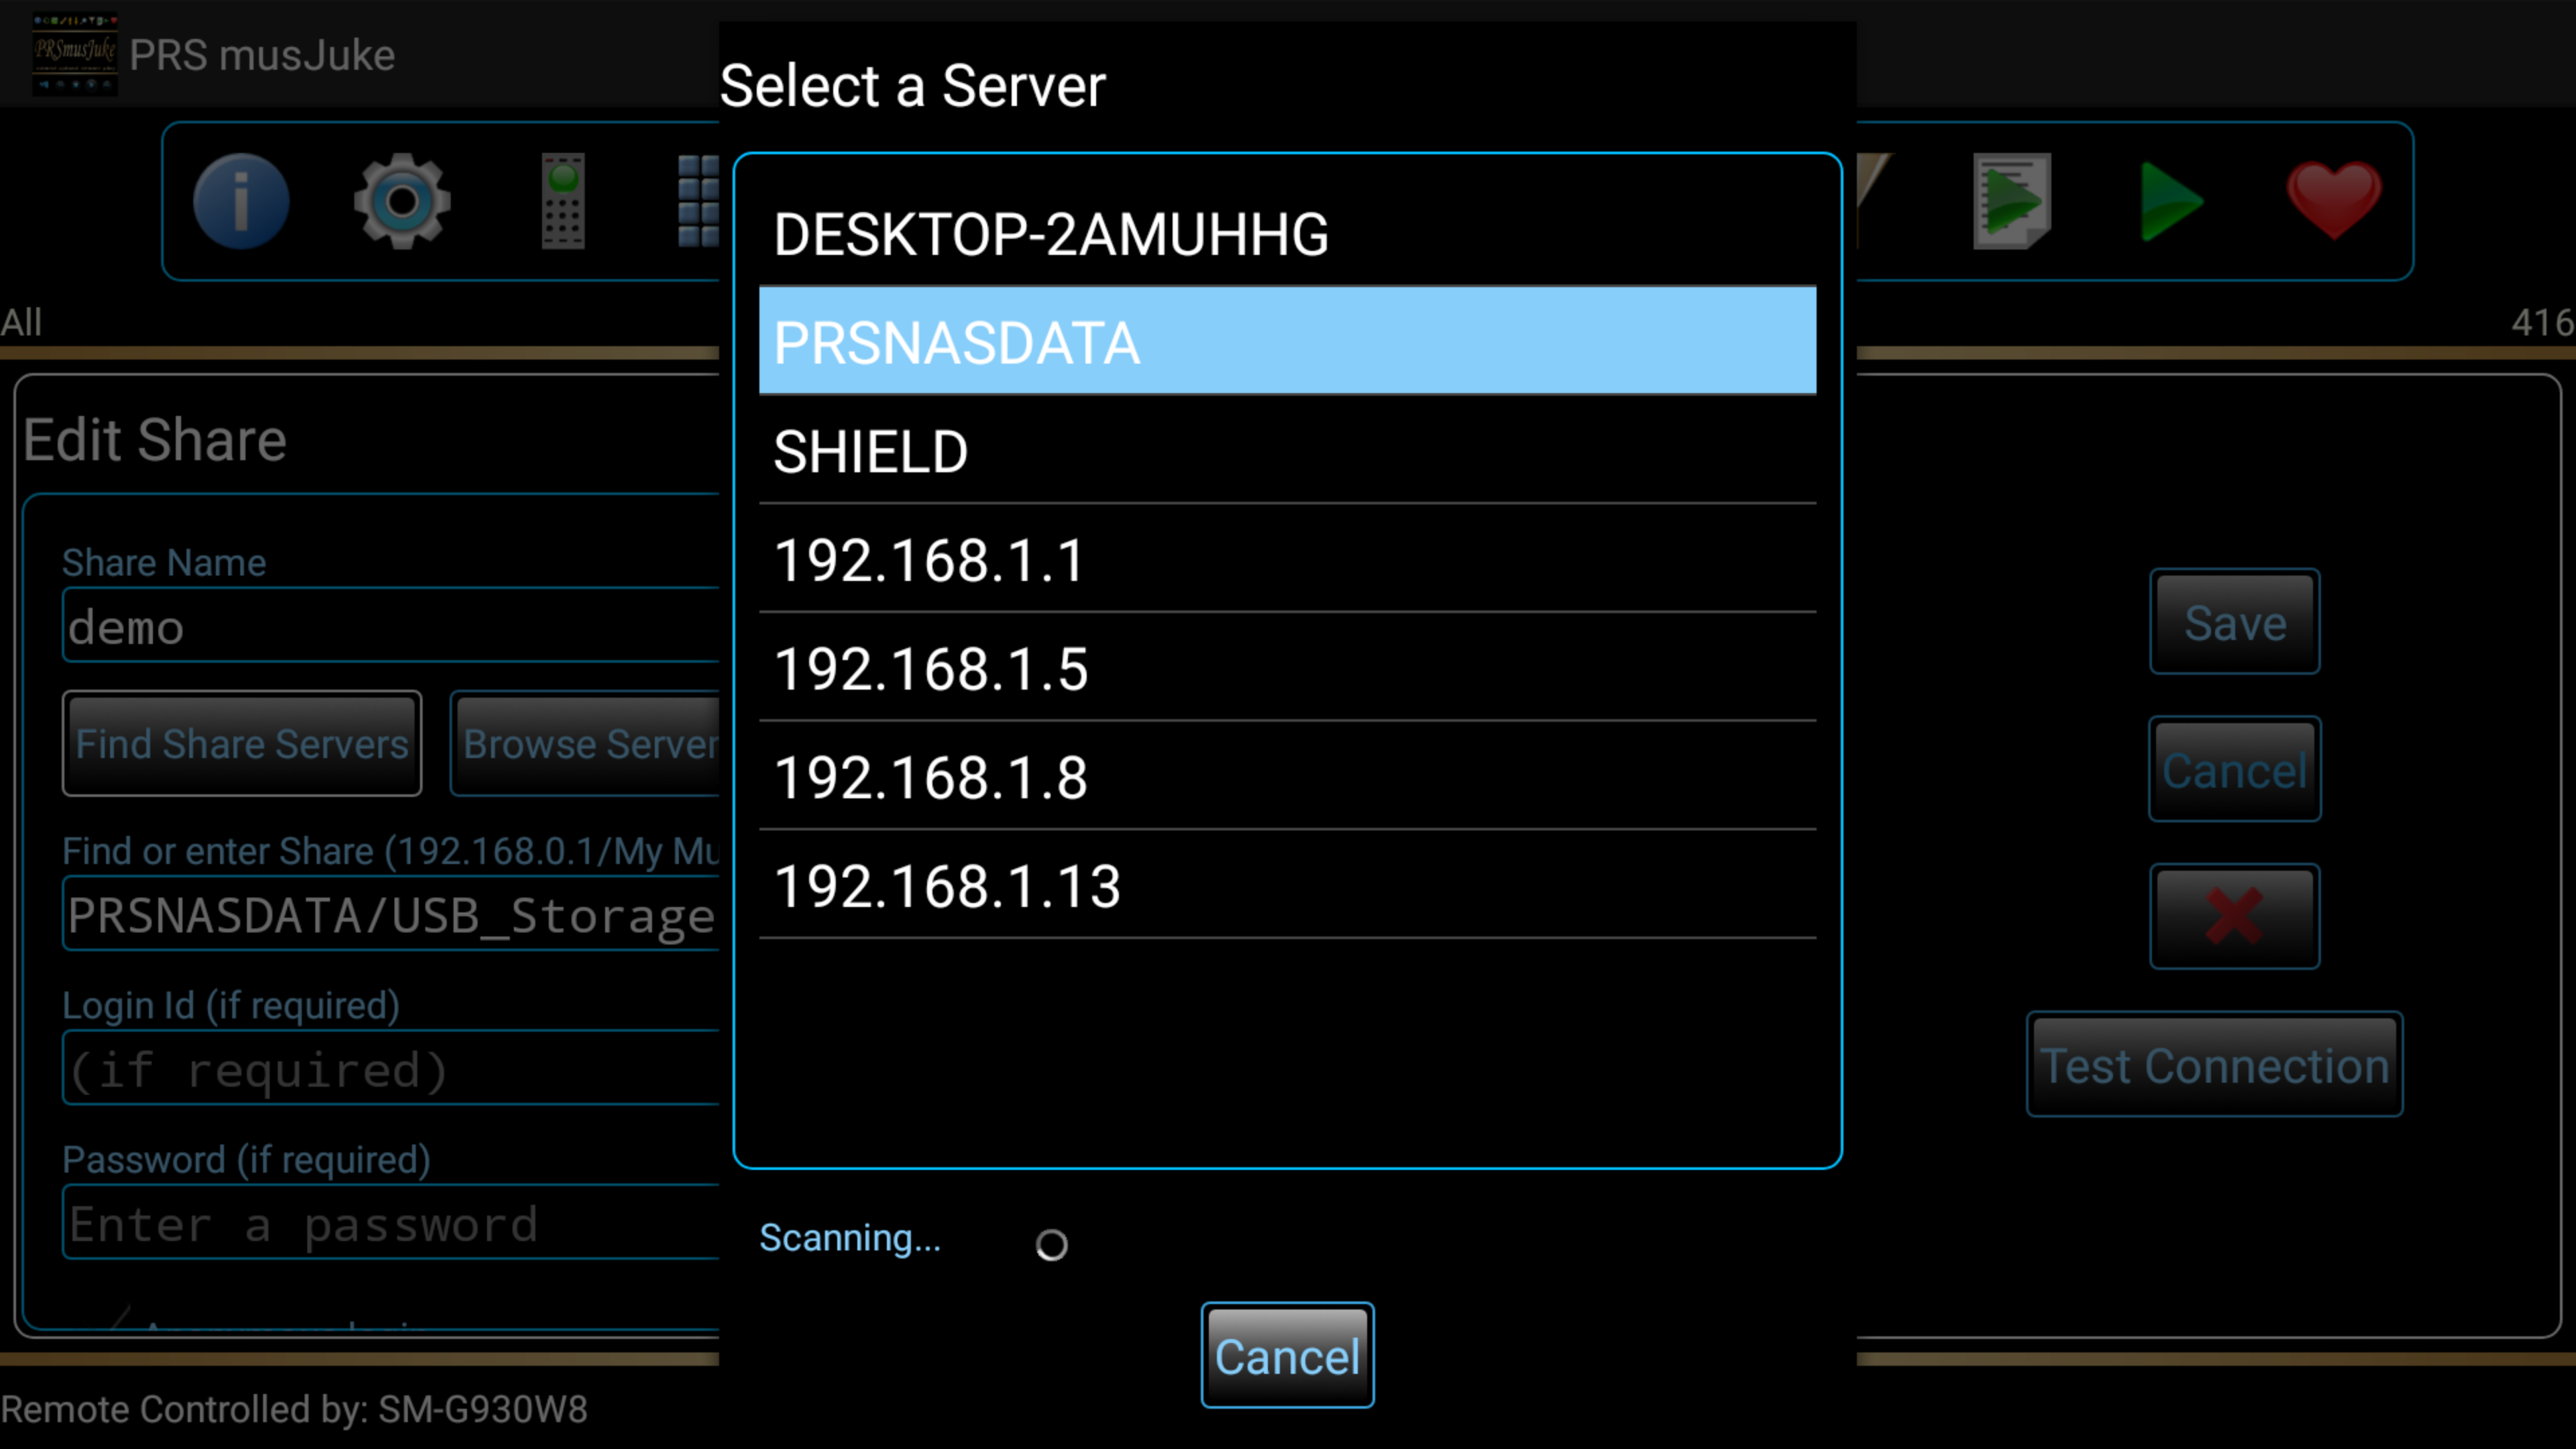 Select Servers or Devices on your network to scan